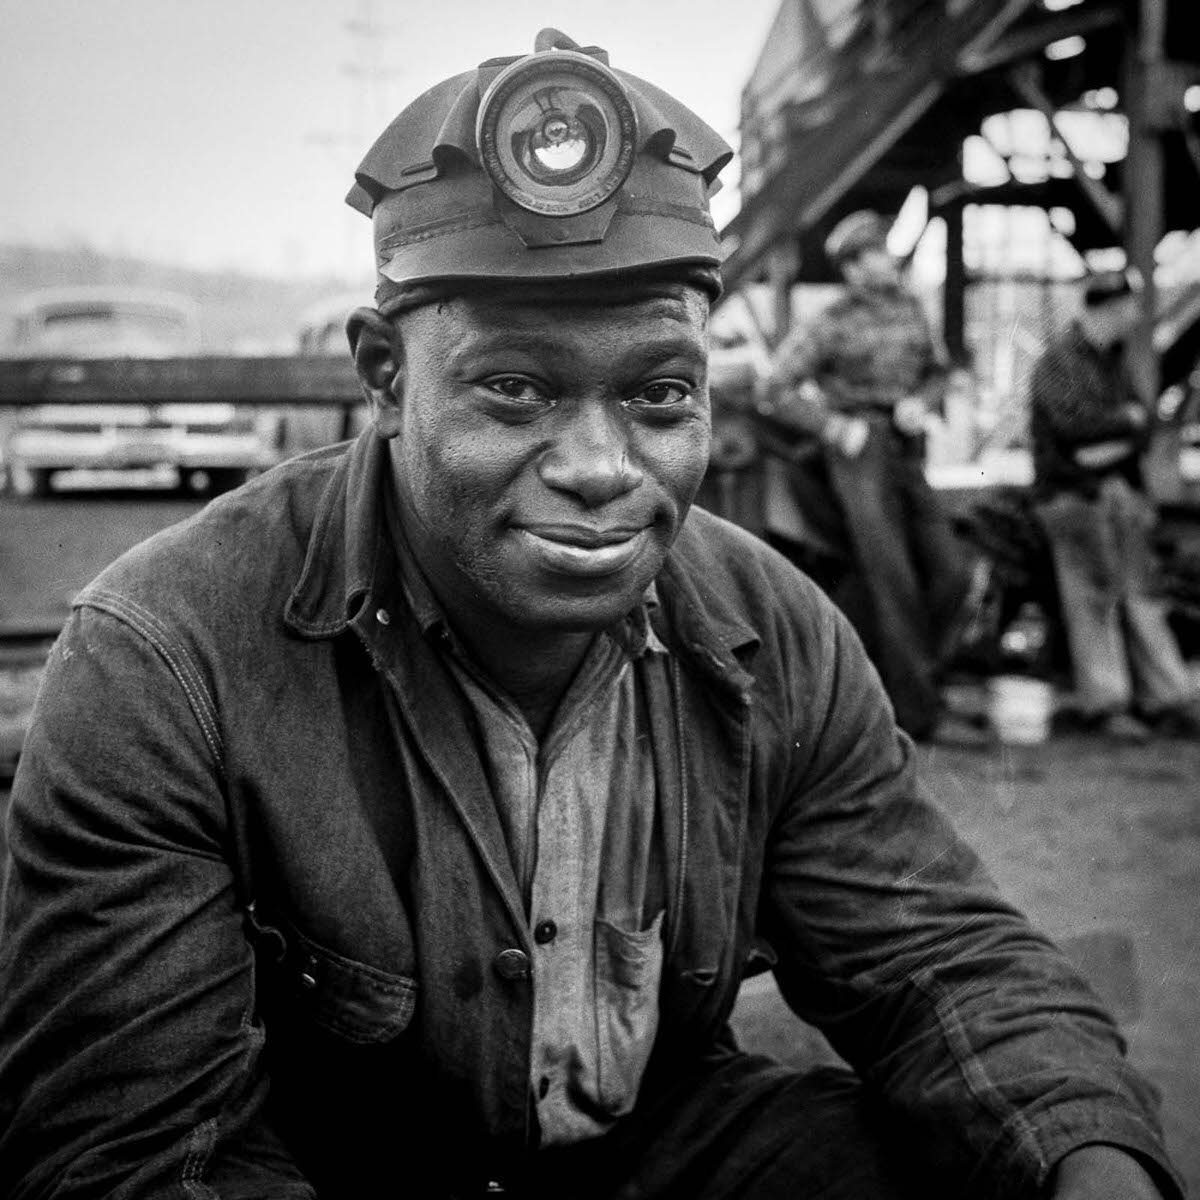 Rare Vintage Photos Reveal the Gritty Lives of Pennsylvania Coal Miners in 1942